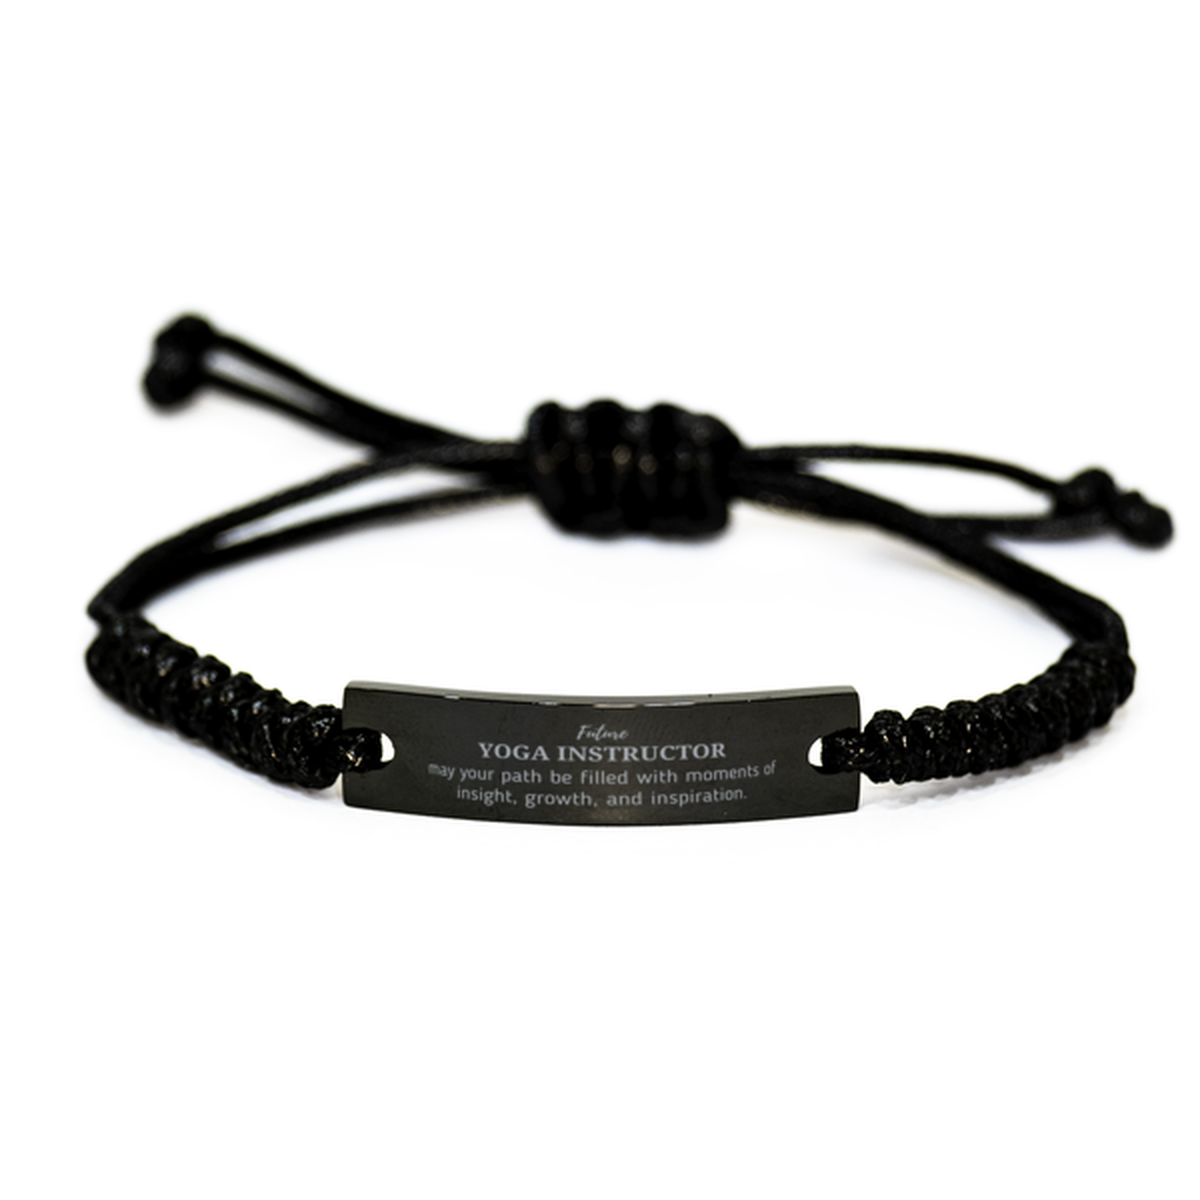 Future Yoga Instructor Gifts, May your path be filled with moments of insight, Graduation Gifts for New Yoga Instructor, Christmas Unique Black Rope Bracelet For Men, Women, Friends